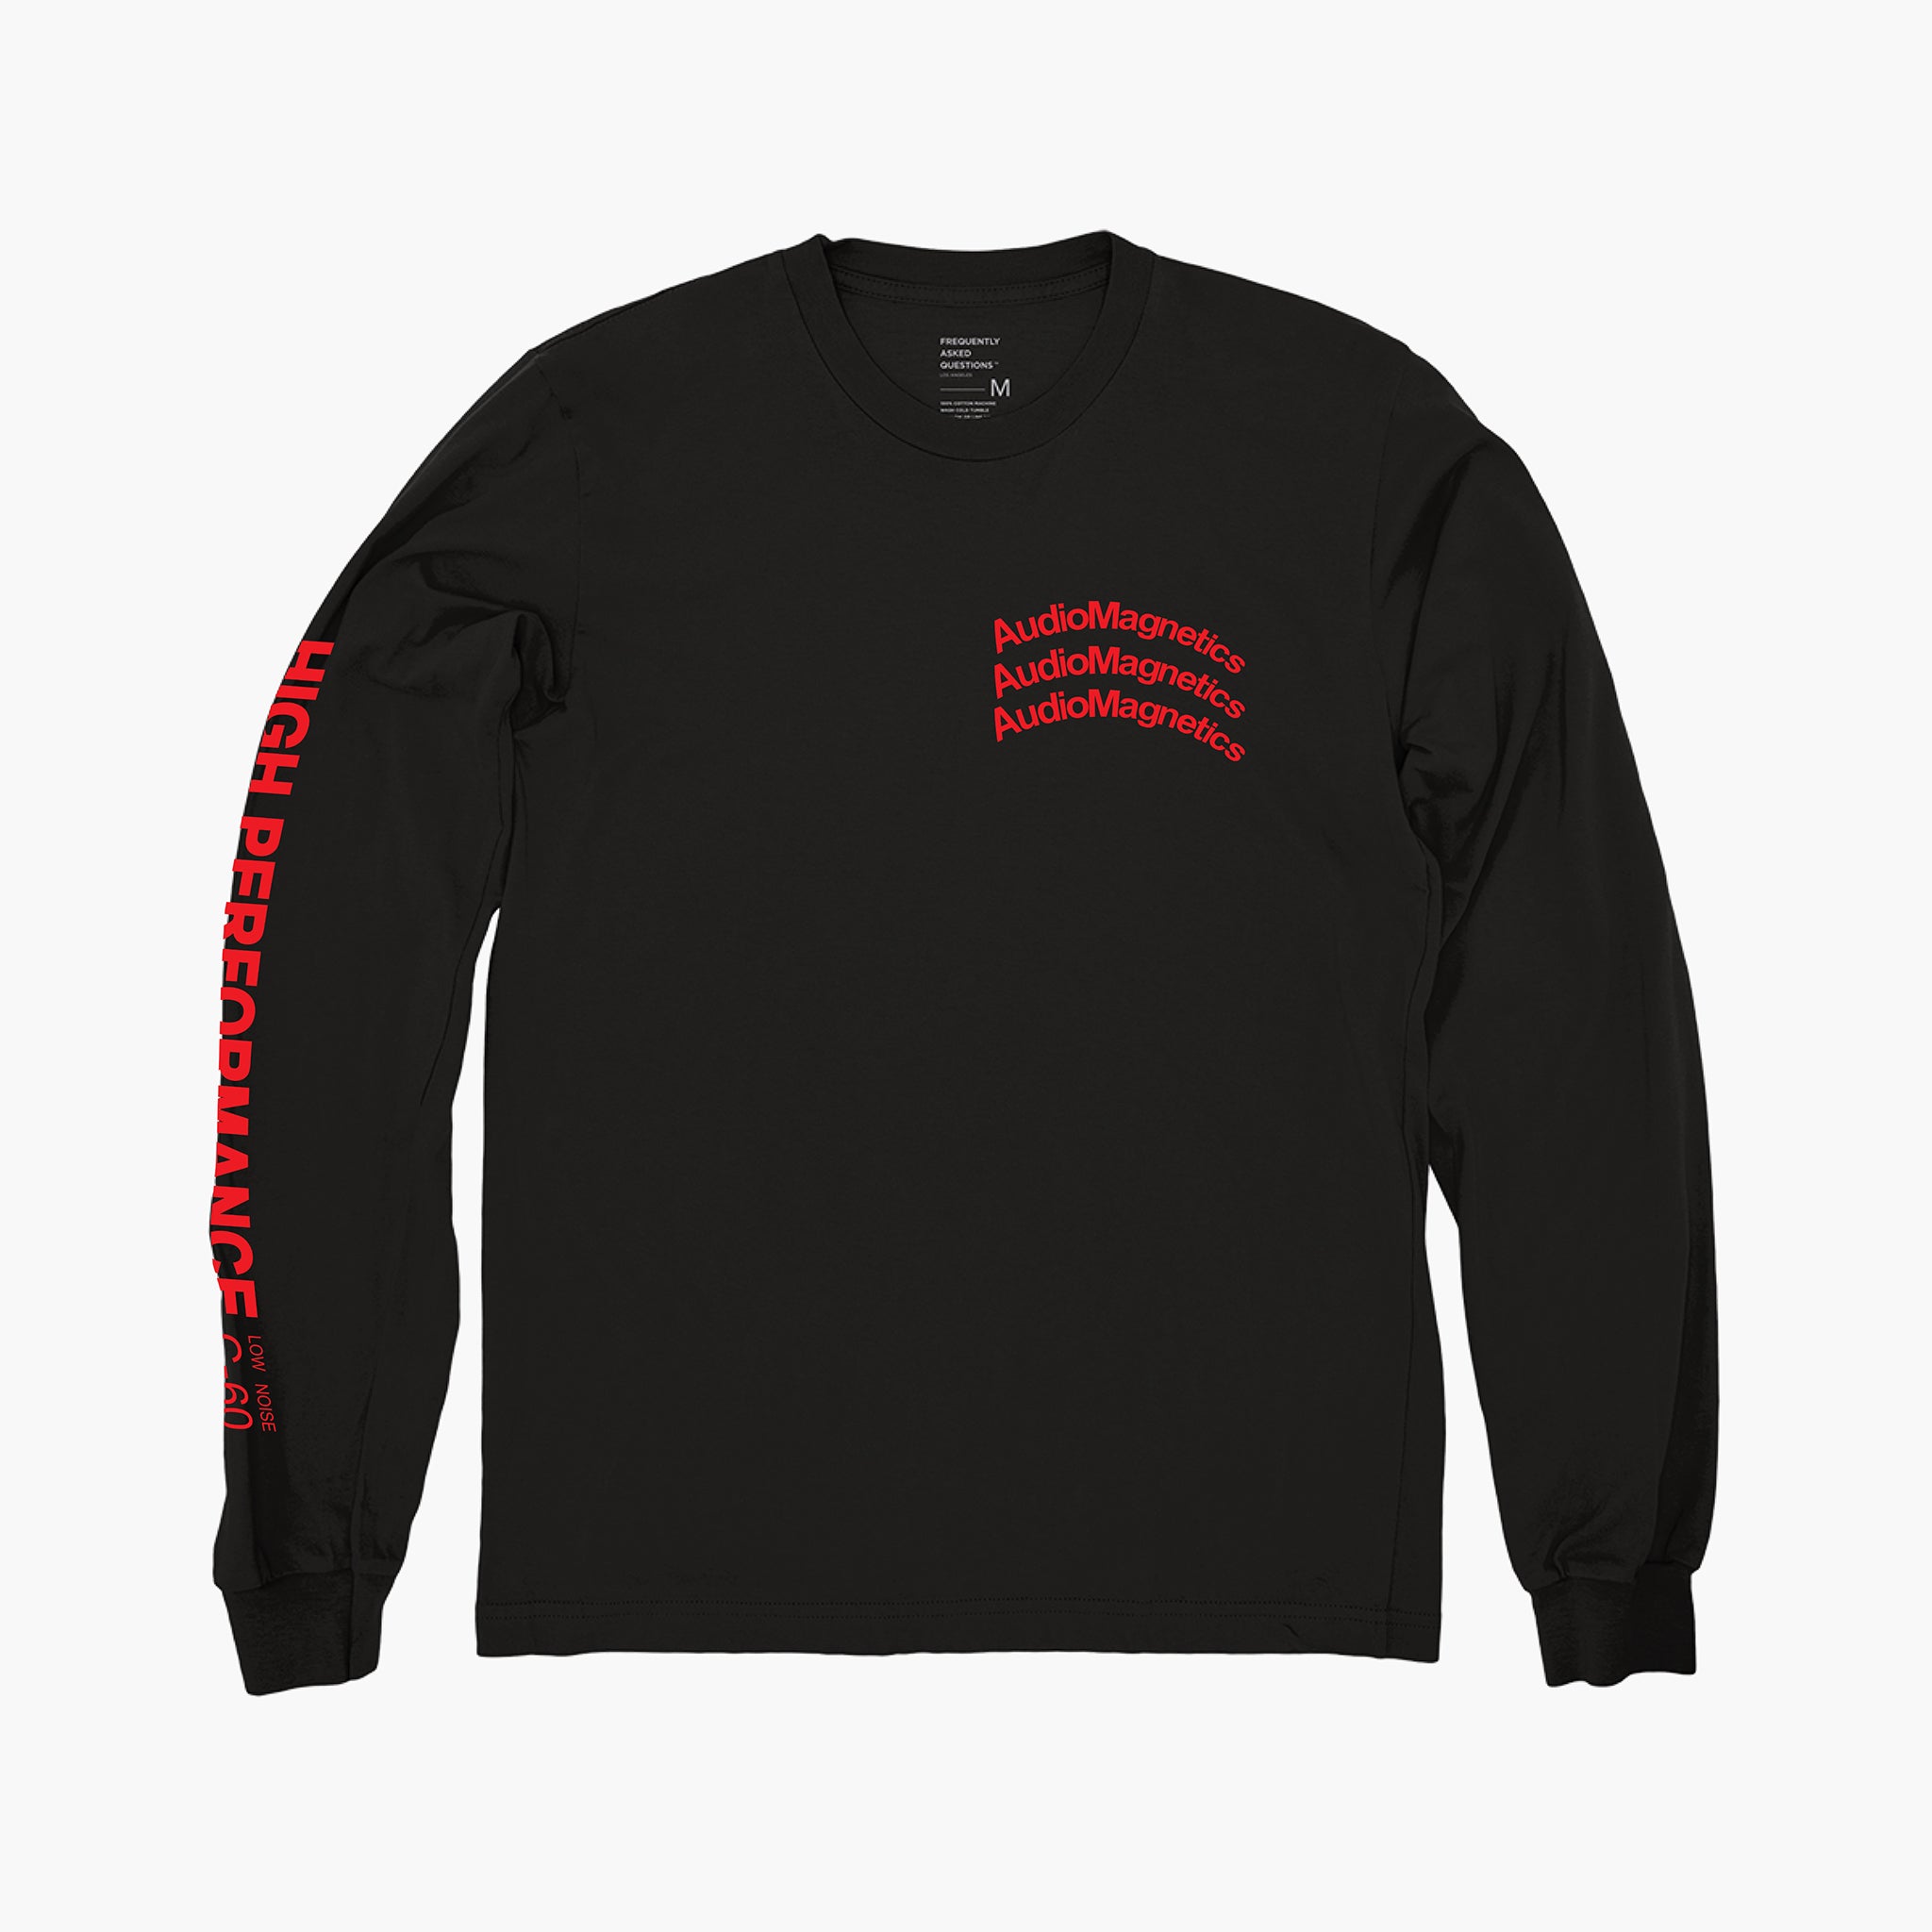 AudioMagnetics Long Sleeve T-Shirt - Frequently Asked Questions